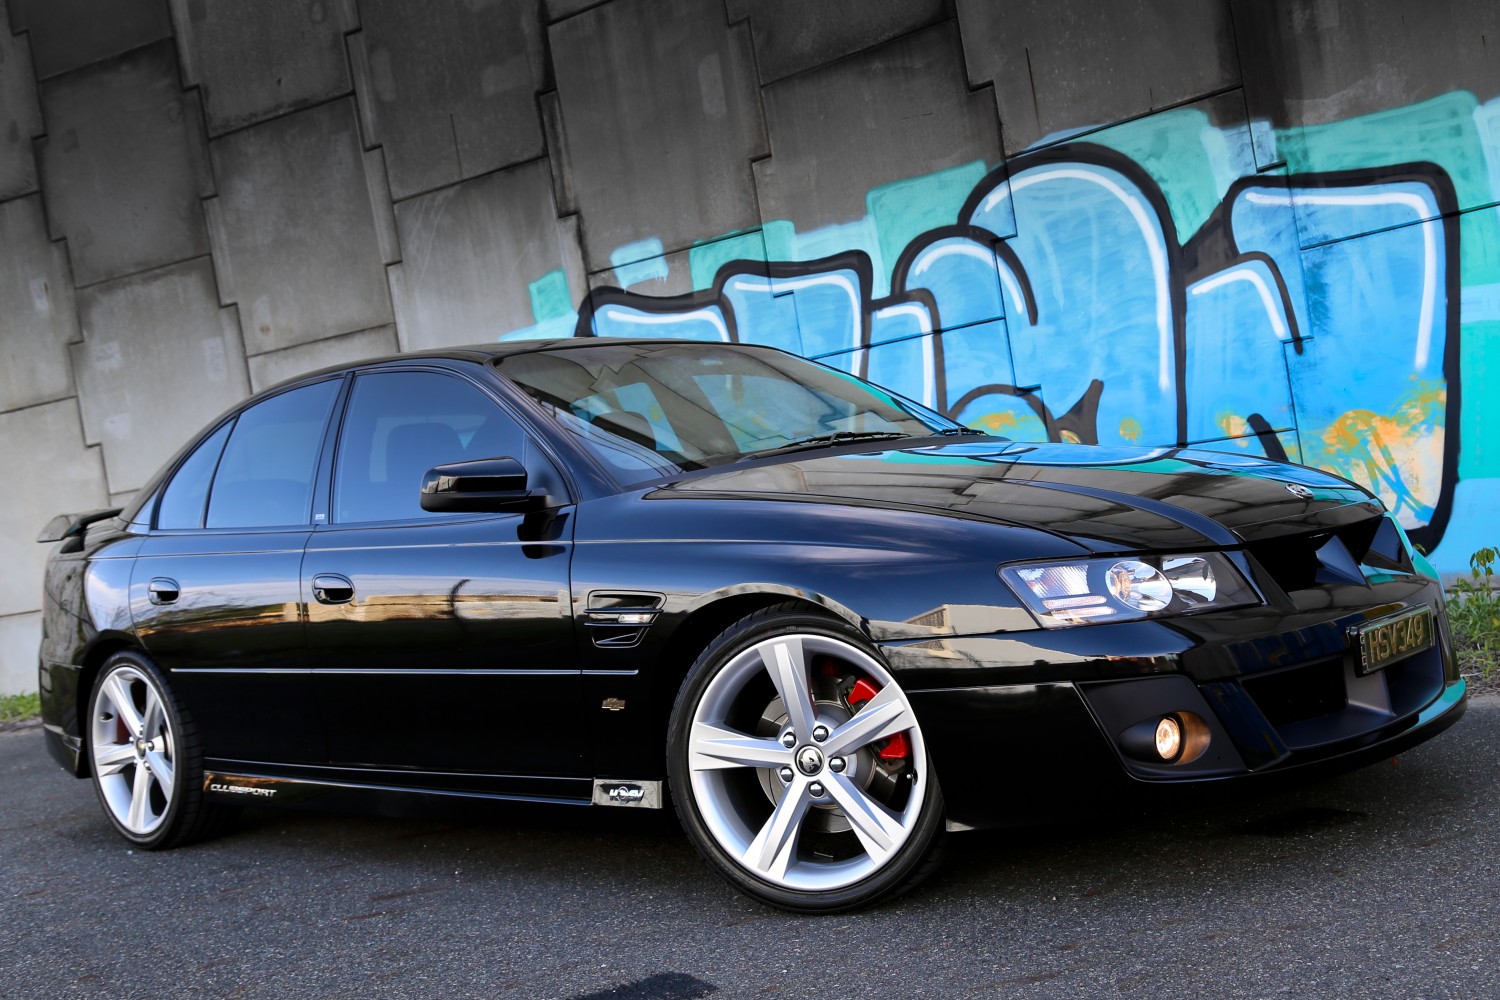 05 Holden Special Vehicles Vz Clubsport 21 Shannons Club Online Show Shine